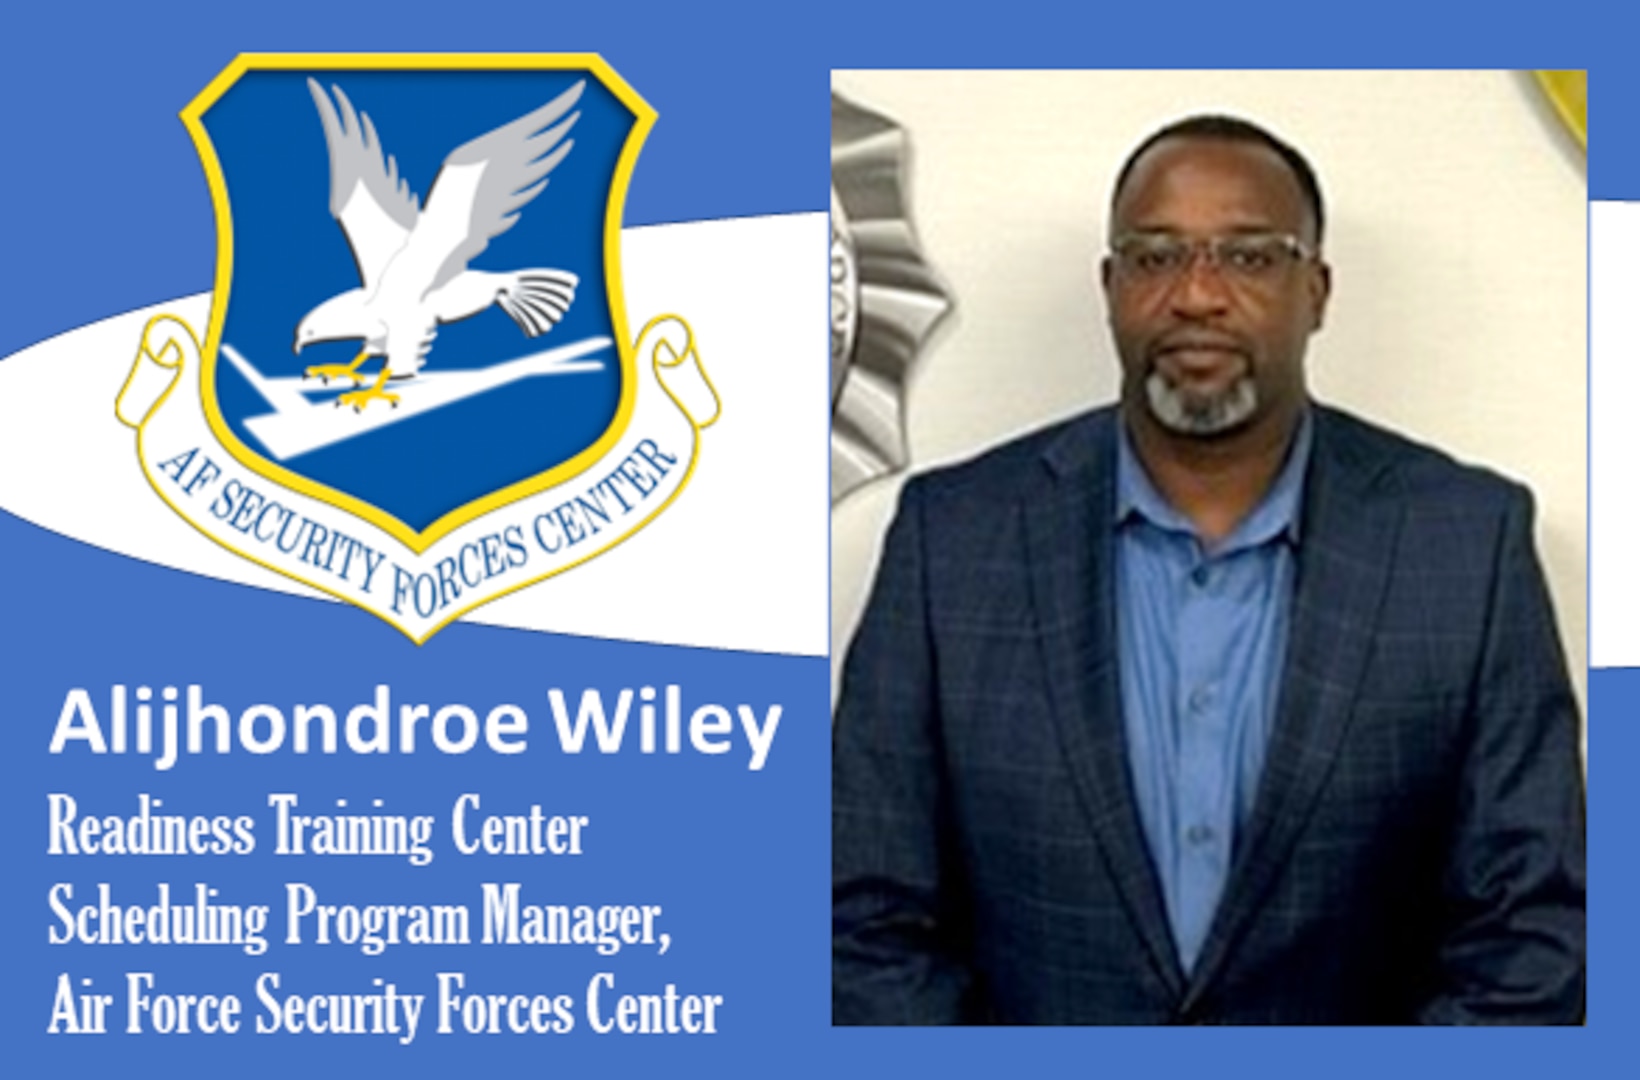 photo of Wiley with AFSFC shield